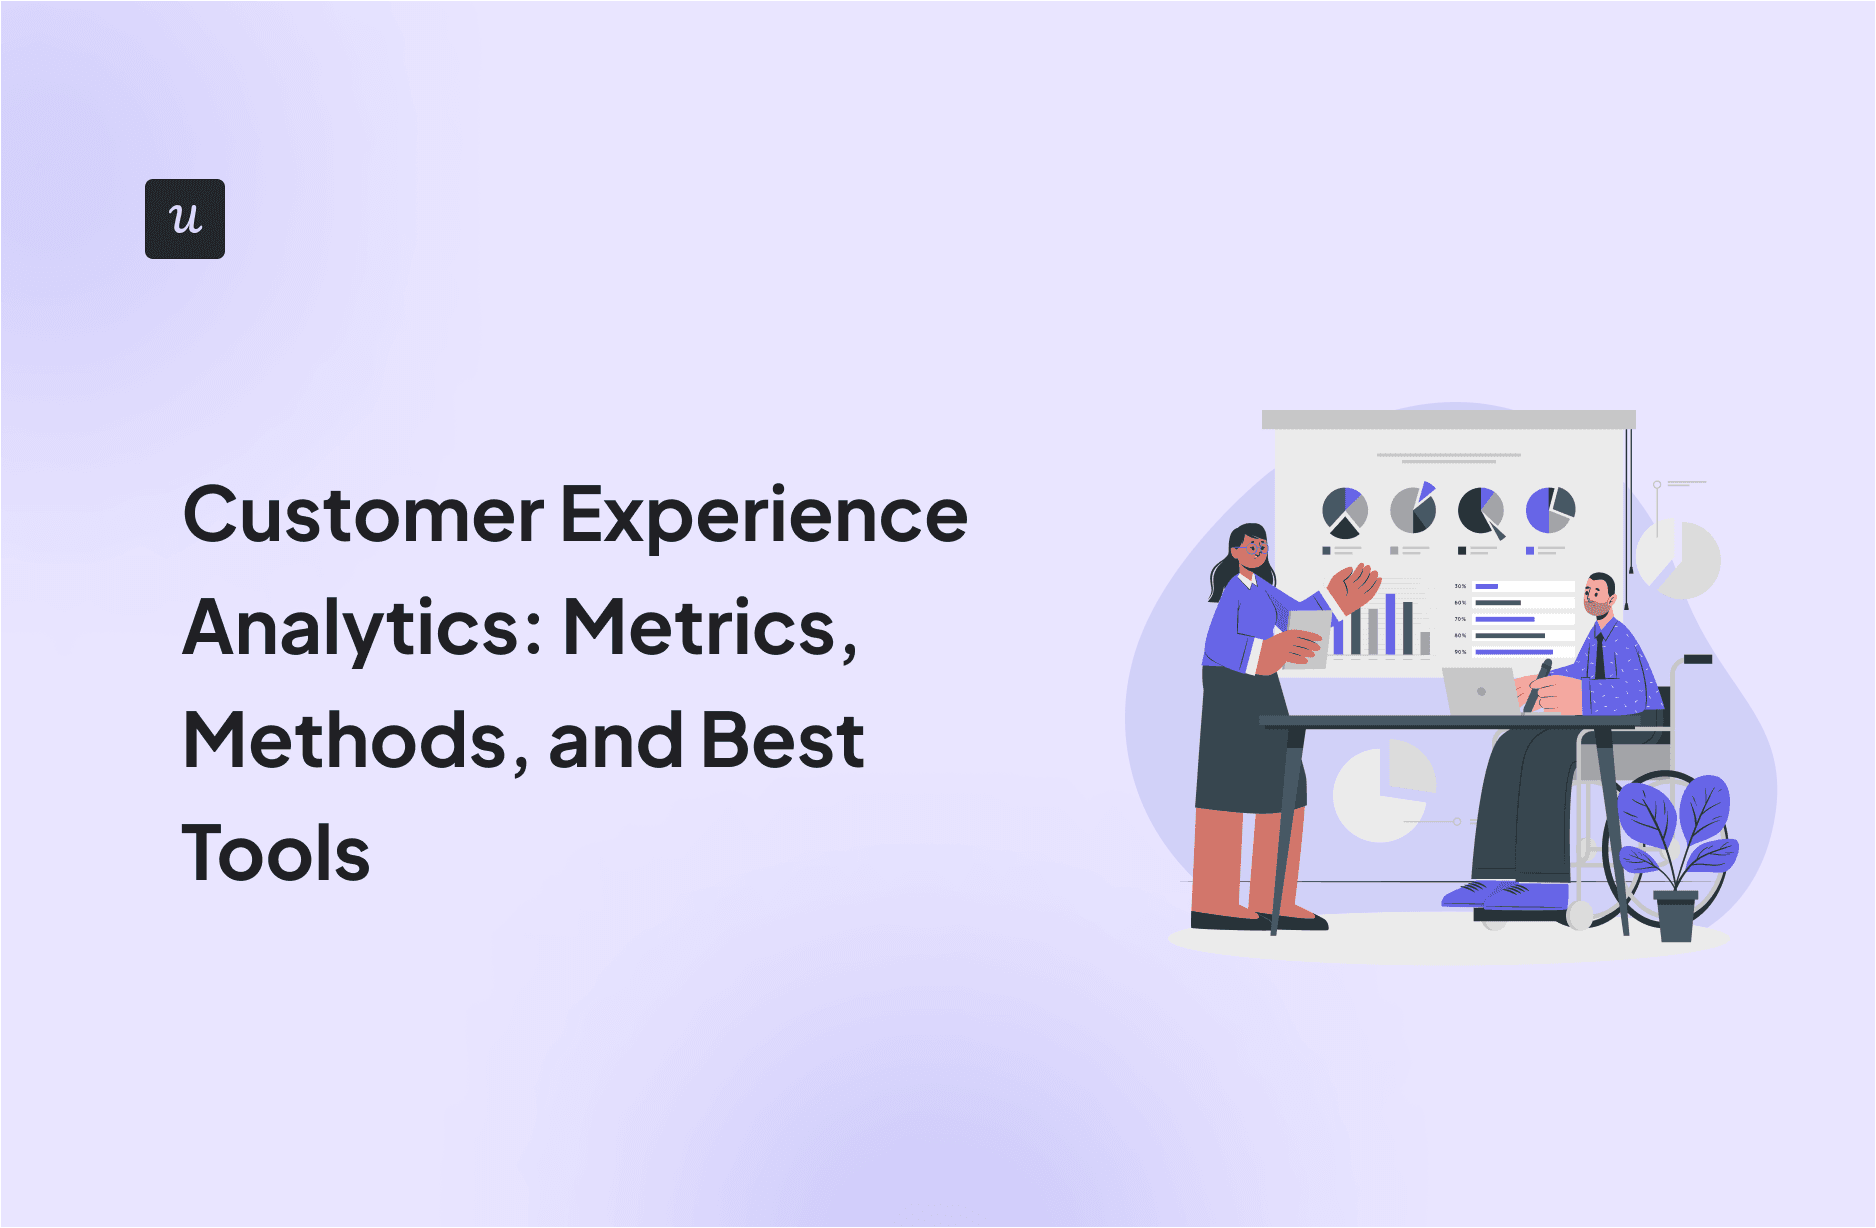 Customer-Experience-Analytics-5-Steps-To-Conduct-a-CX-Analysis